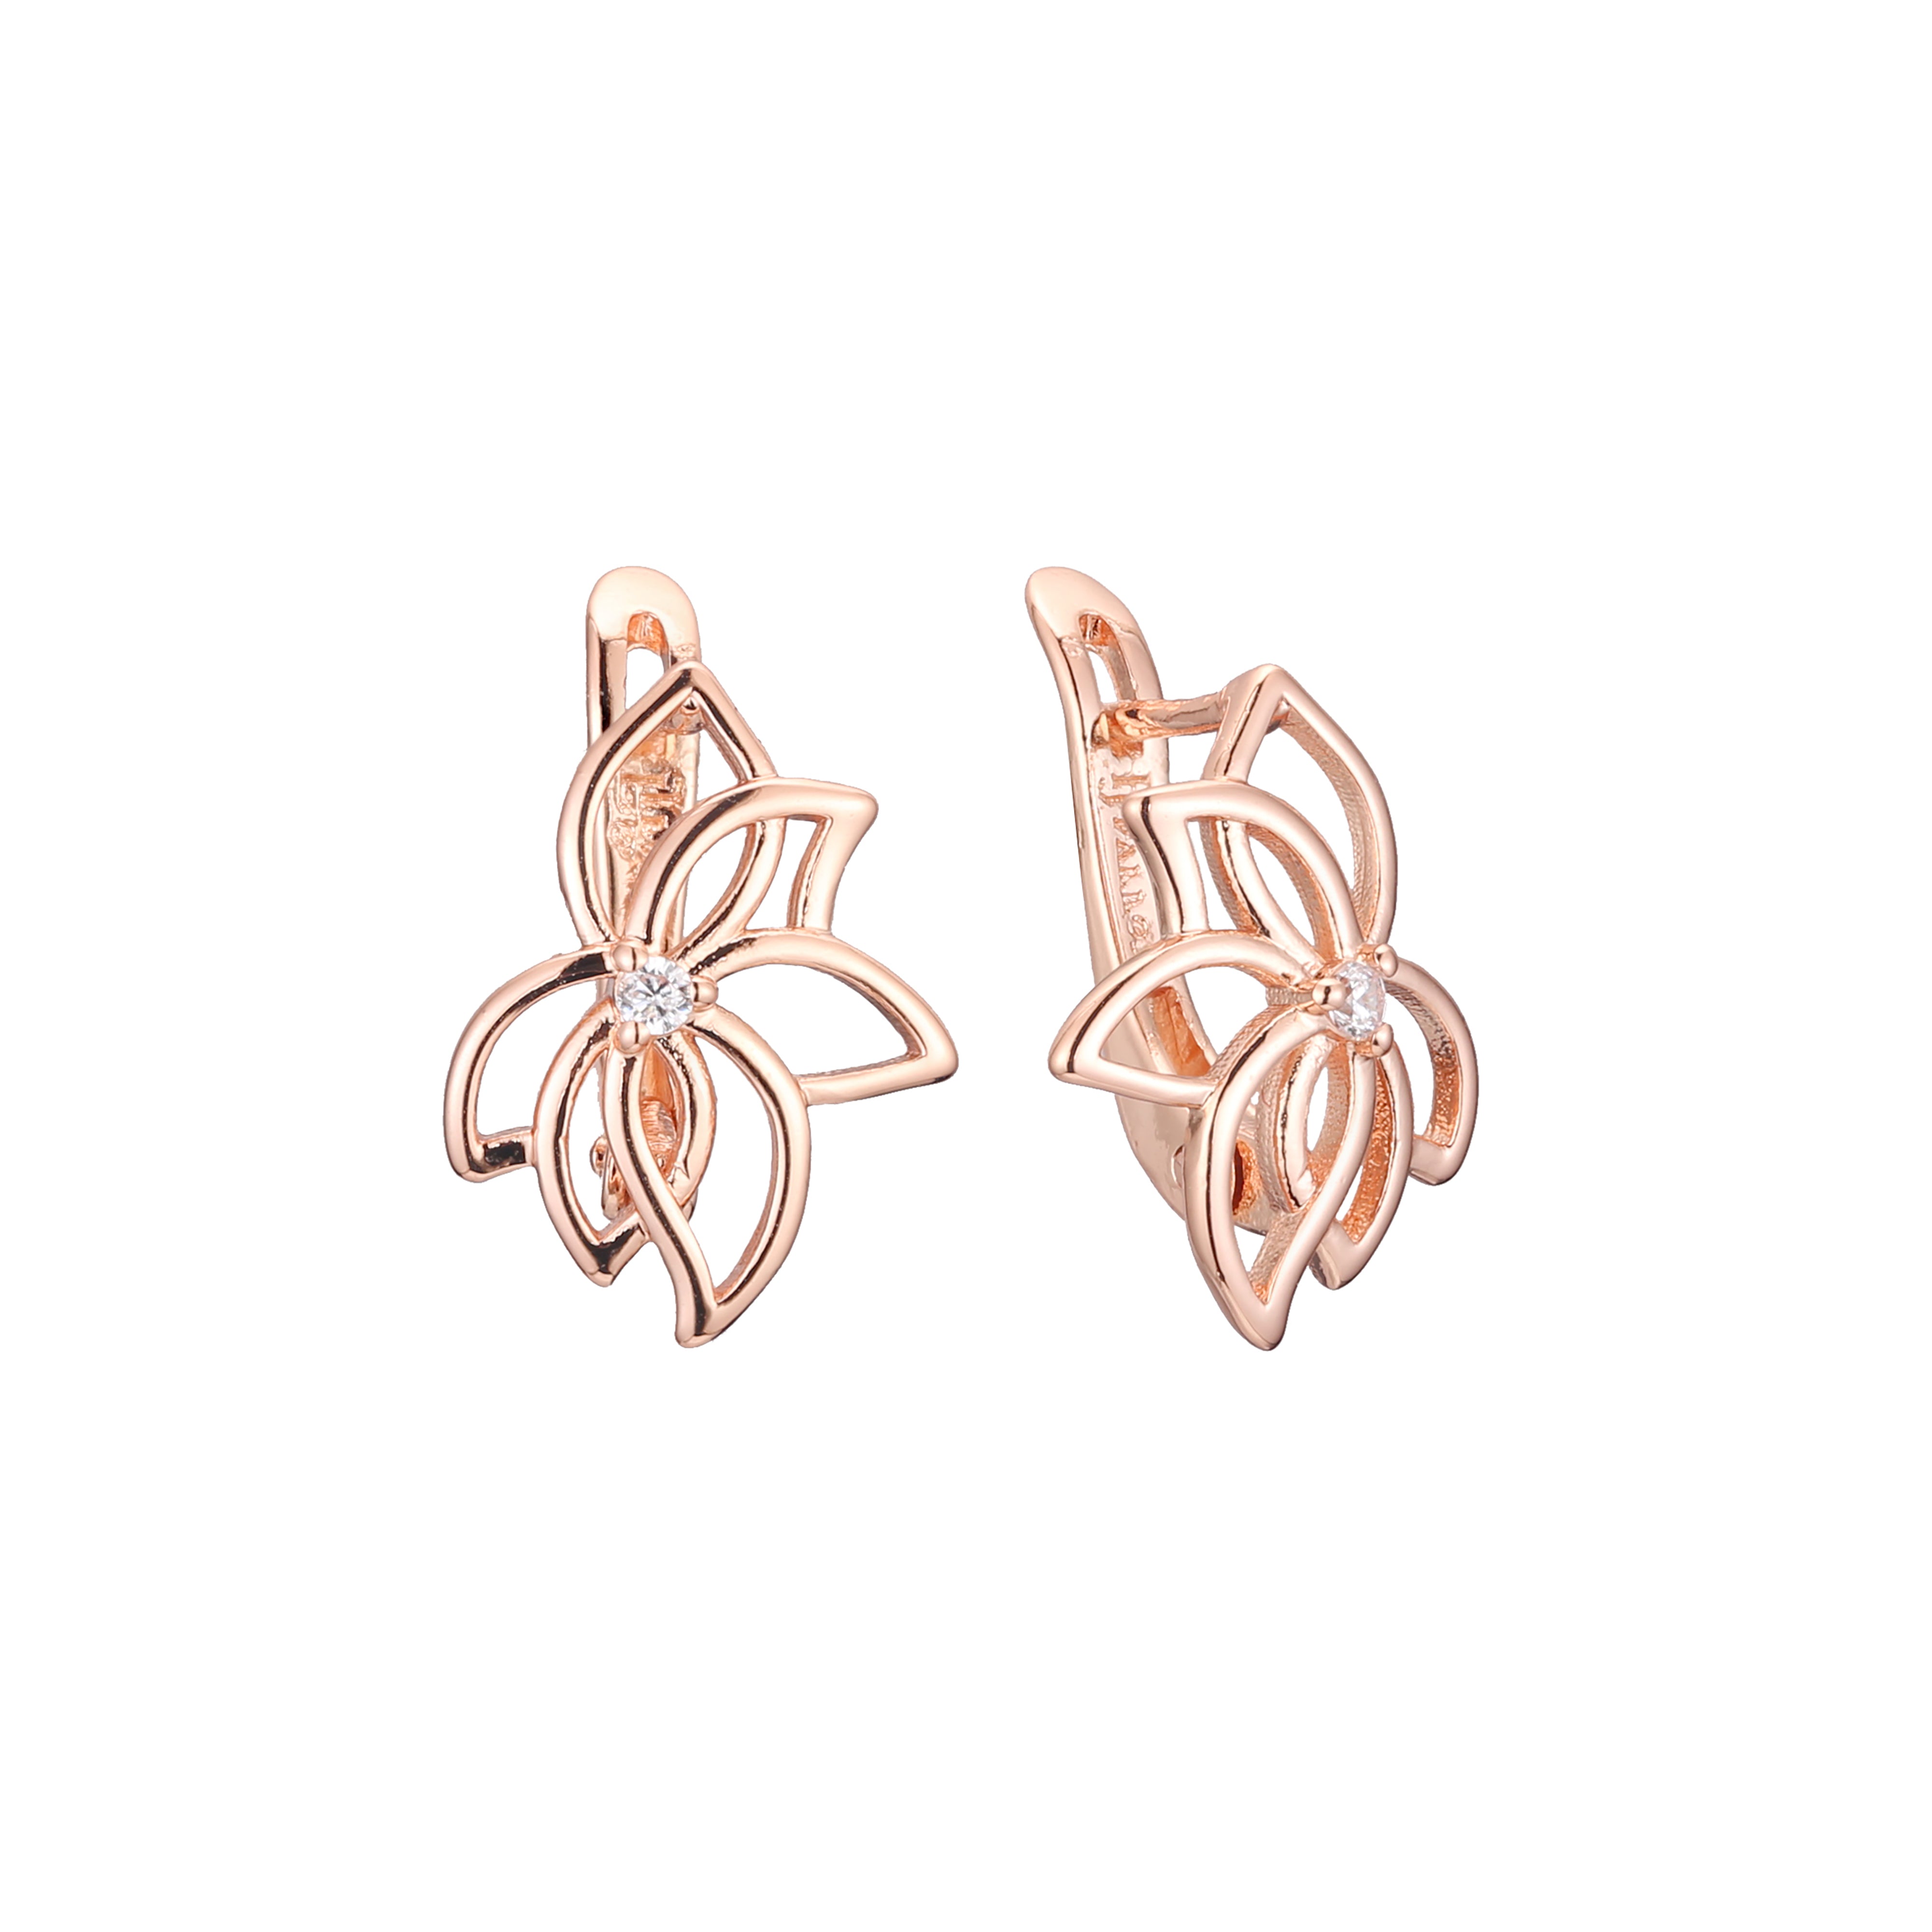 Leaves solitaire earrings in 14K Gold, Rose Gold, two tone plating colors